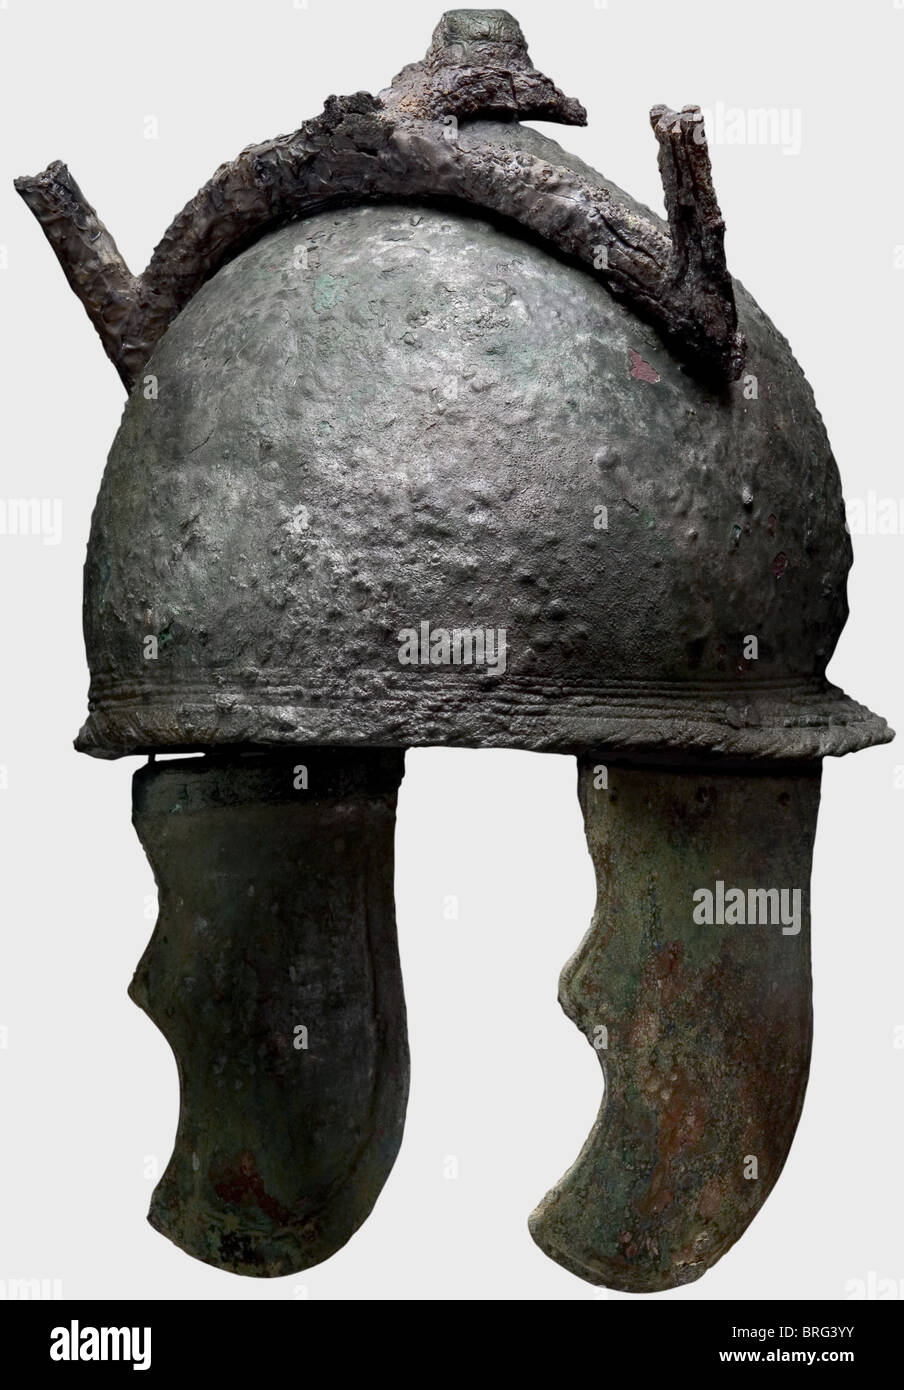 A set of Greek-Etruscan armour, 4th/3rd century B.C. A helmet of the Montefortino/Canosa type, Heavy cast Etruscan bronze helmet with a scale decorated top knob and large contoured, curved, cast cheek pieces. Helmet rim with five-fold contouring and remnants of a twisted cord at the nape. Large fragment of a strong iron plume fork faste historic, historical, ancient world, object, objects, stills, clipping, clippings, cut out, cut-out, cut-outs, Additional-Rights-Clearences-Not Available Stock Photo